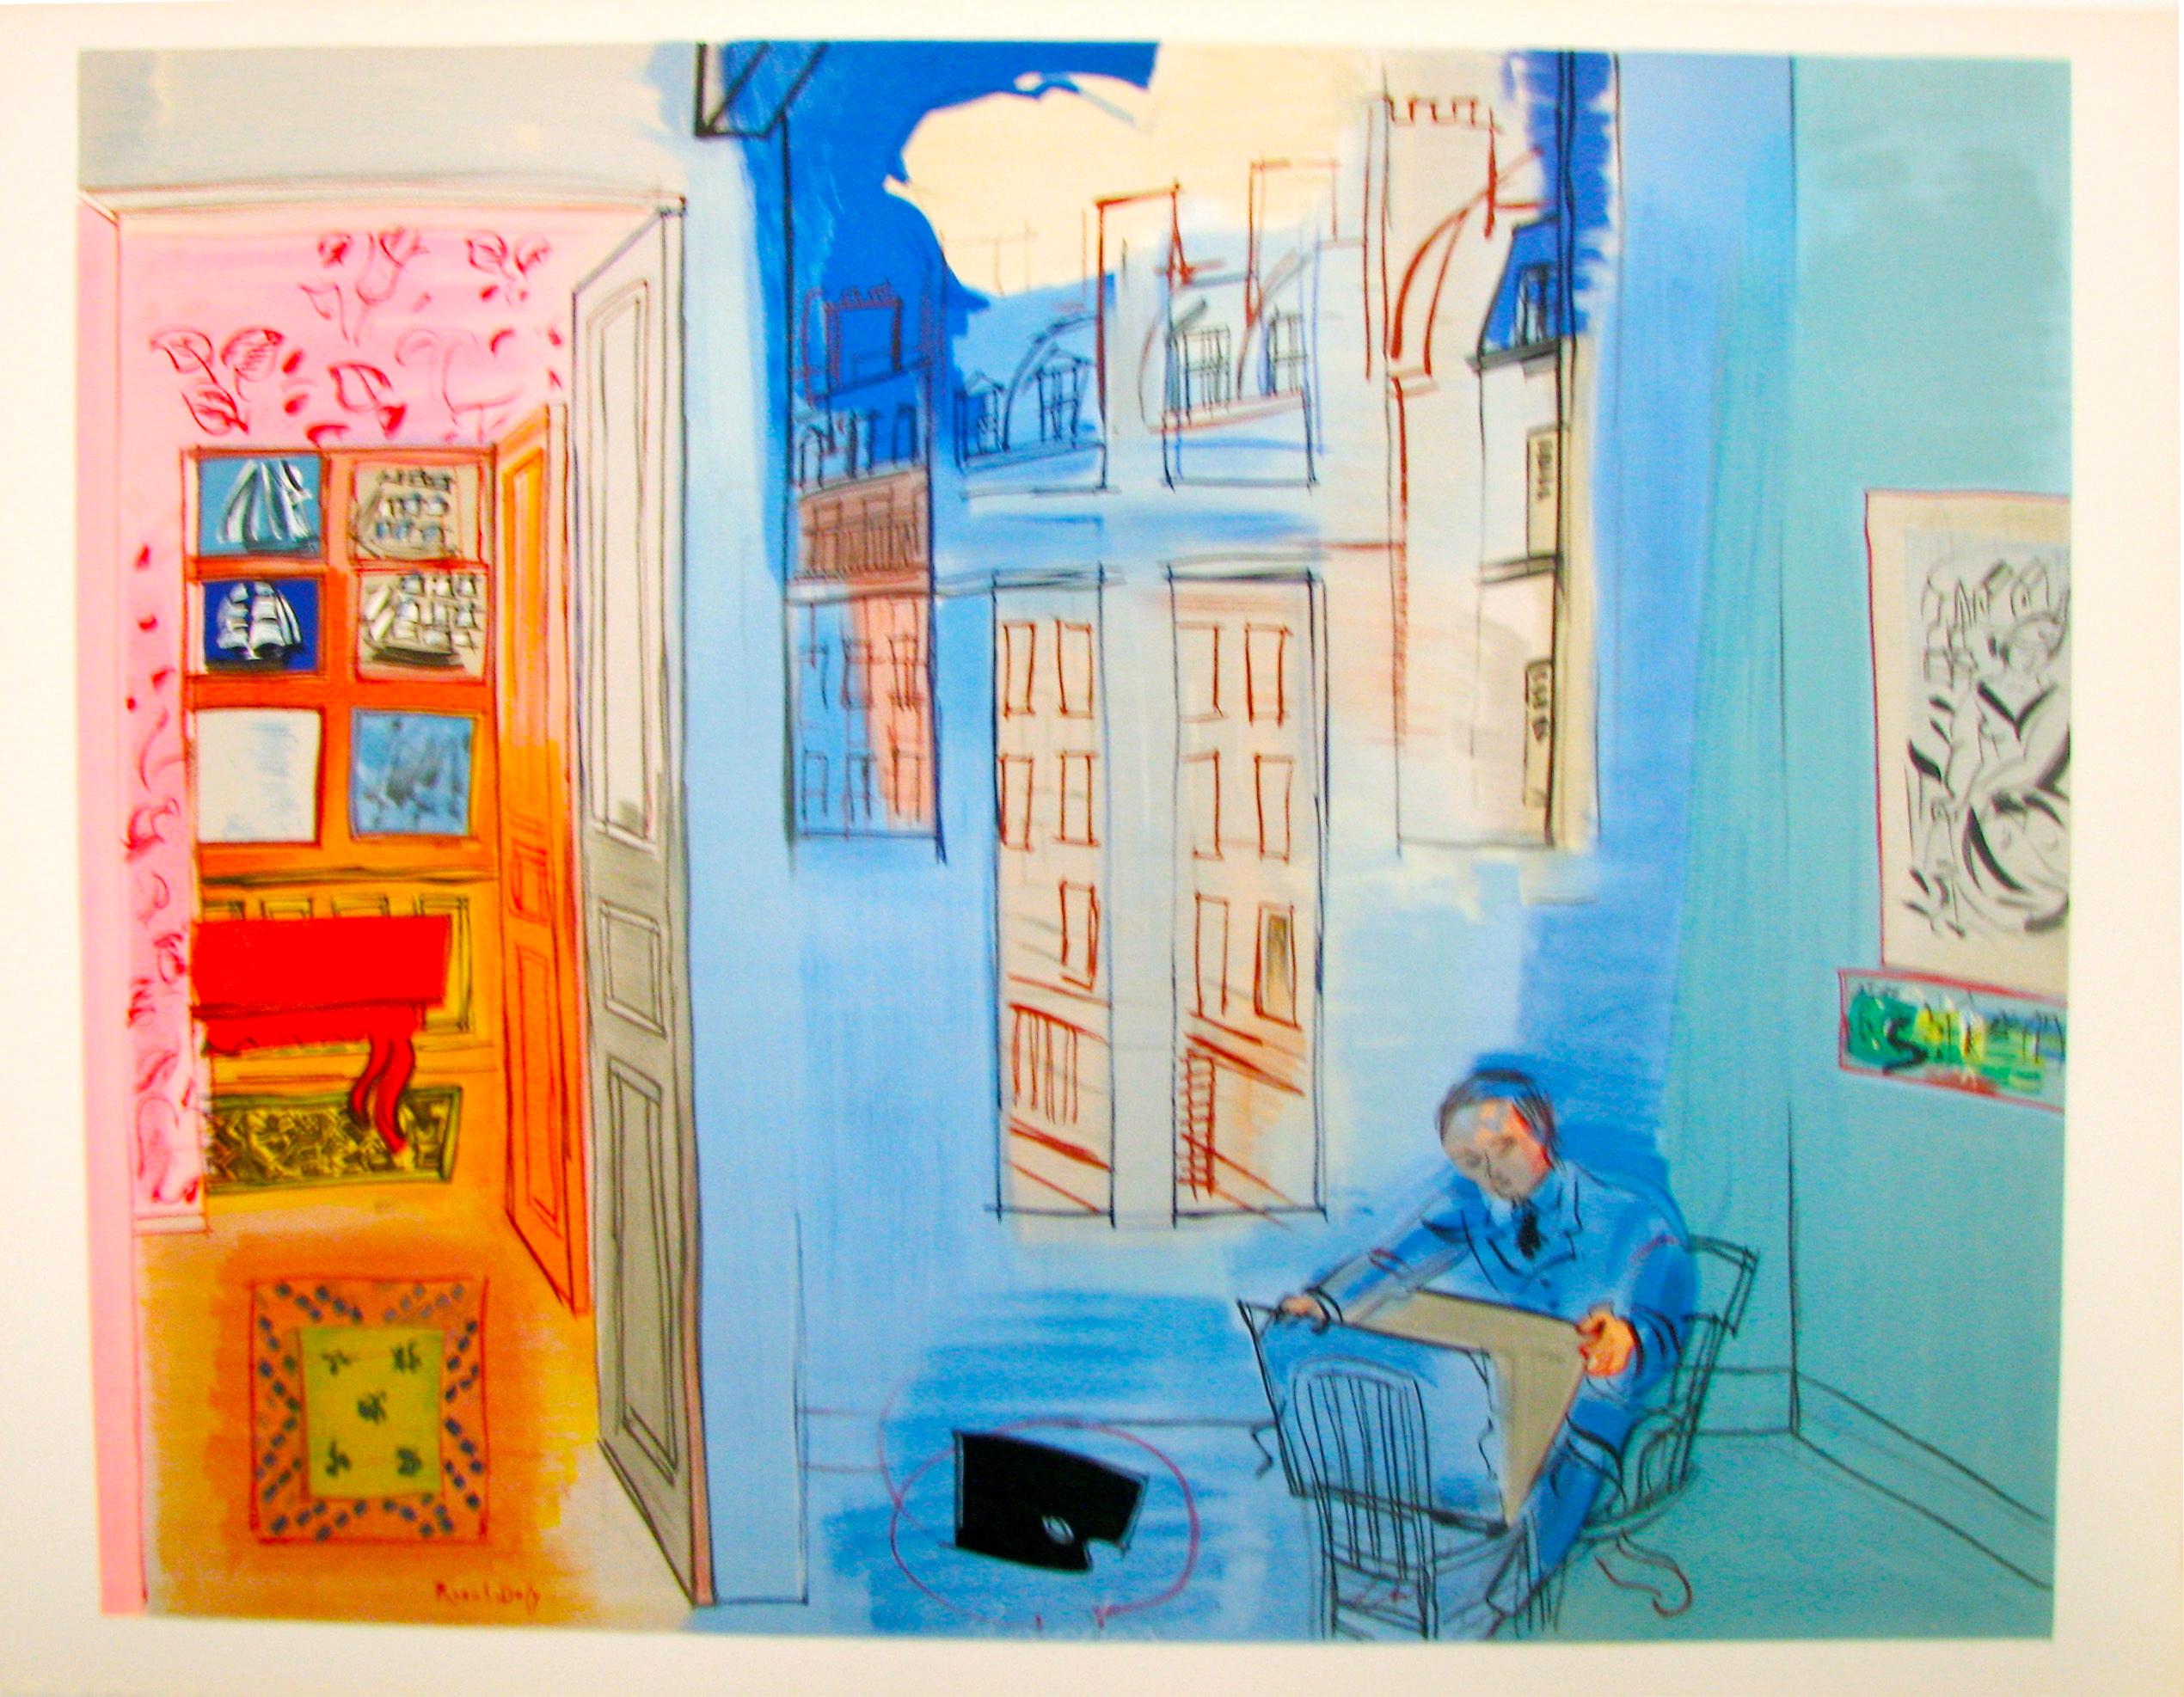 L’atelier (after) Raoul Dufy, Lithograph, 1969